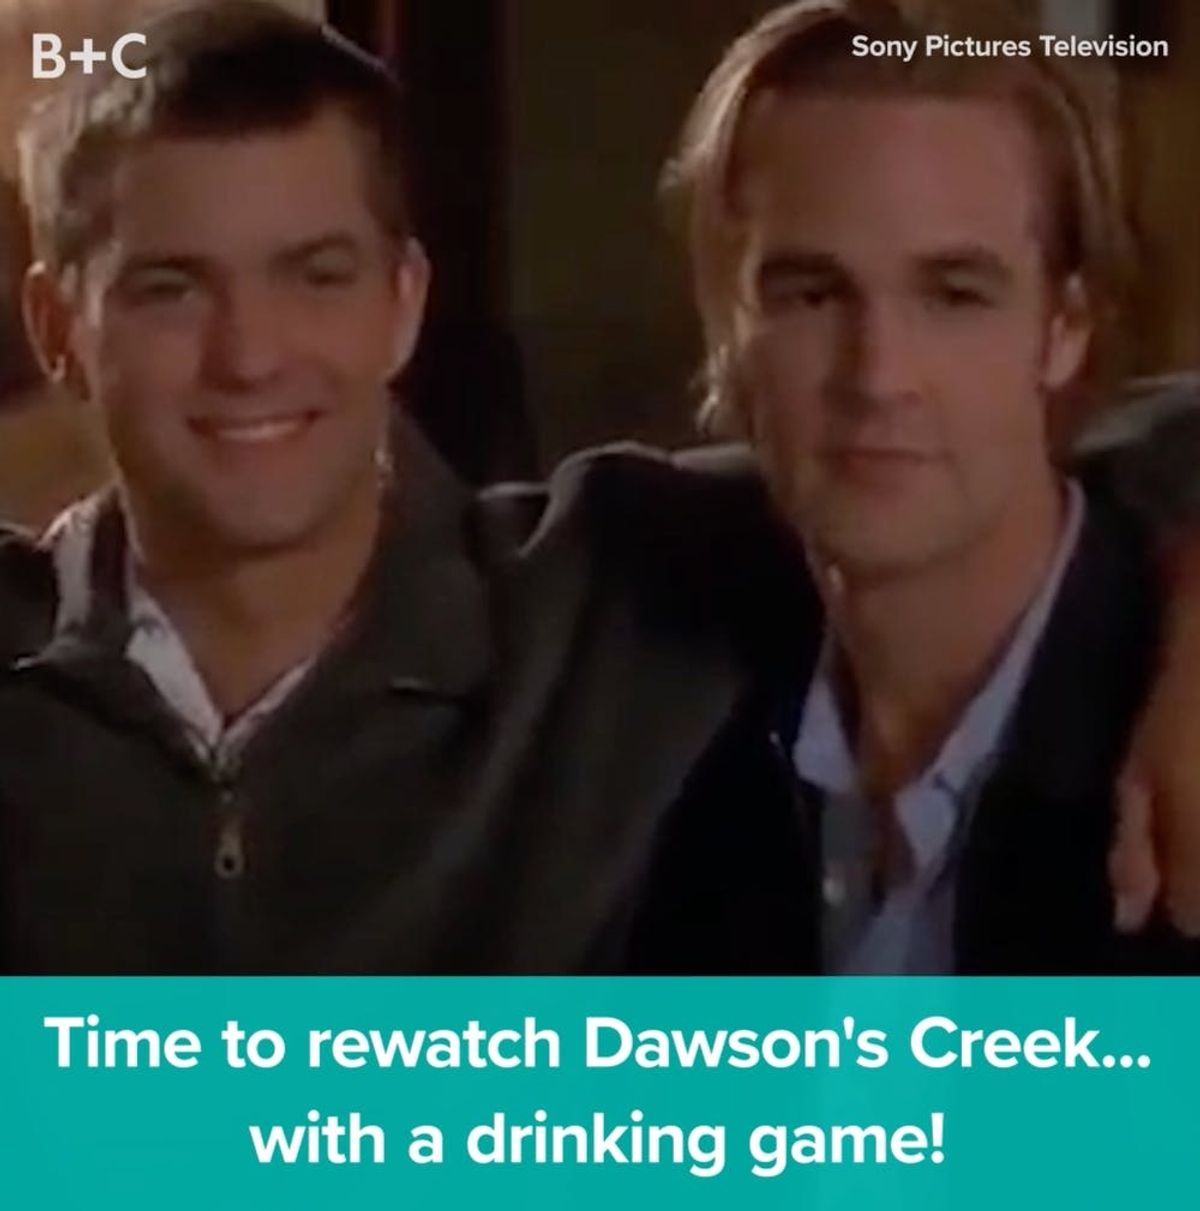 The Ultimate ‘Dawson’s Creek’ Drinking Game